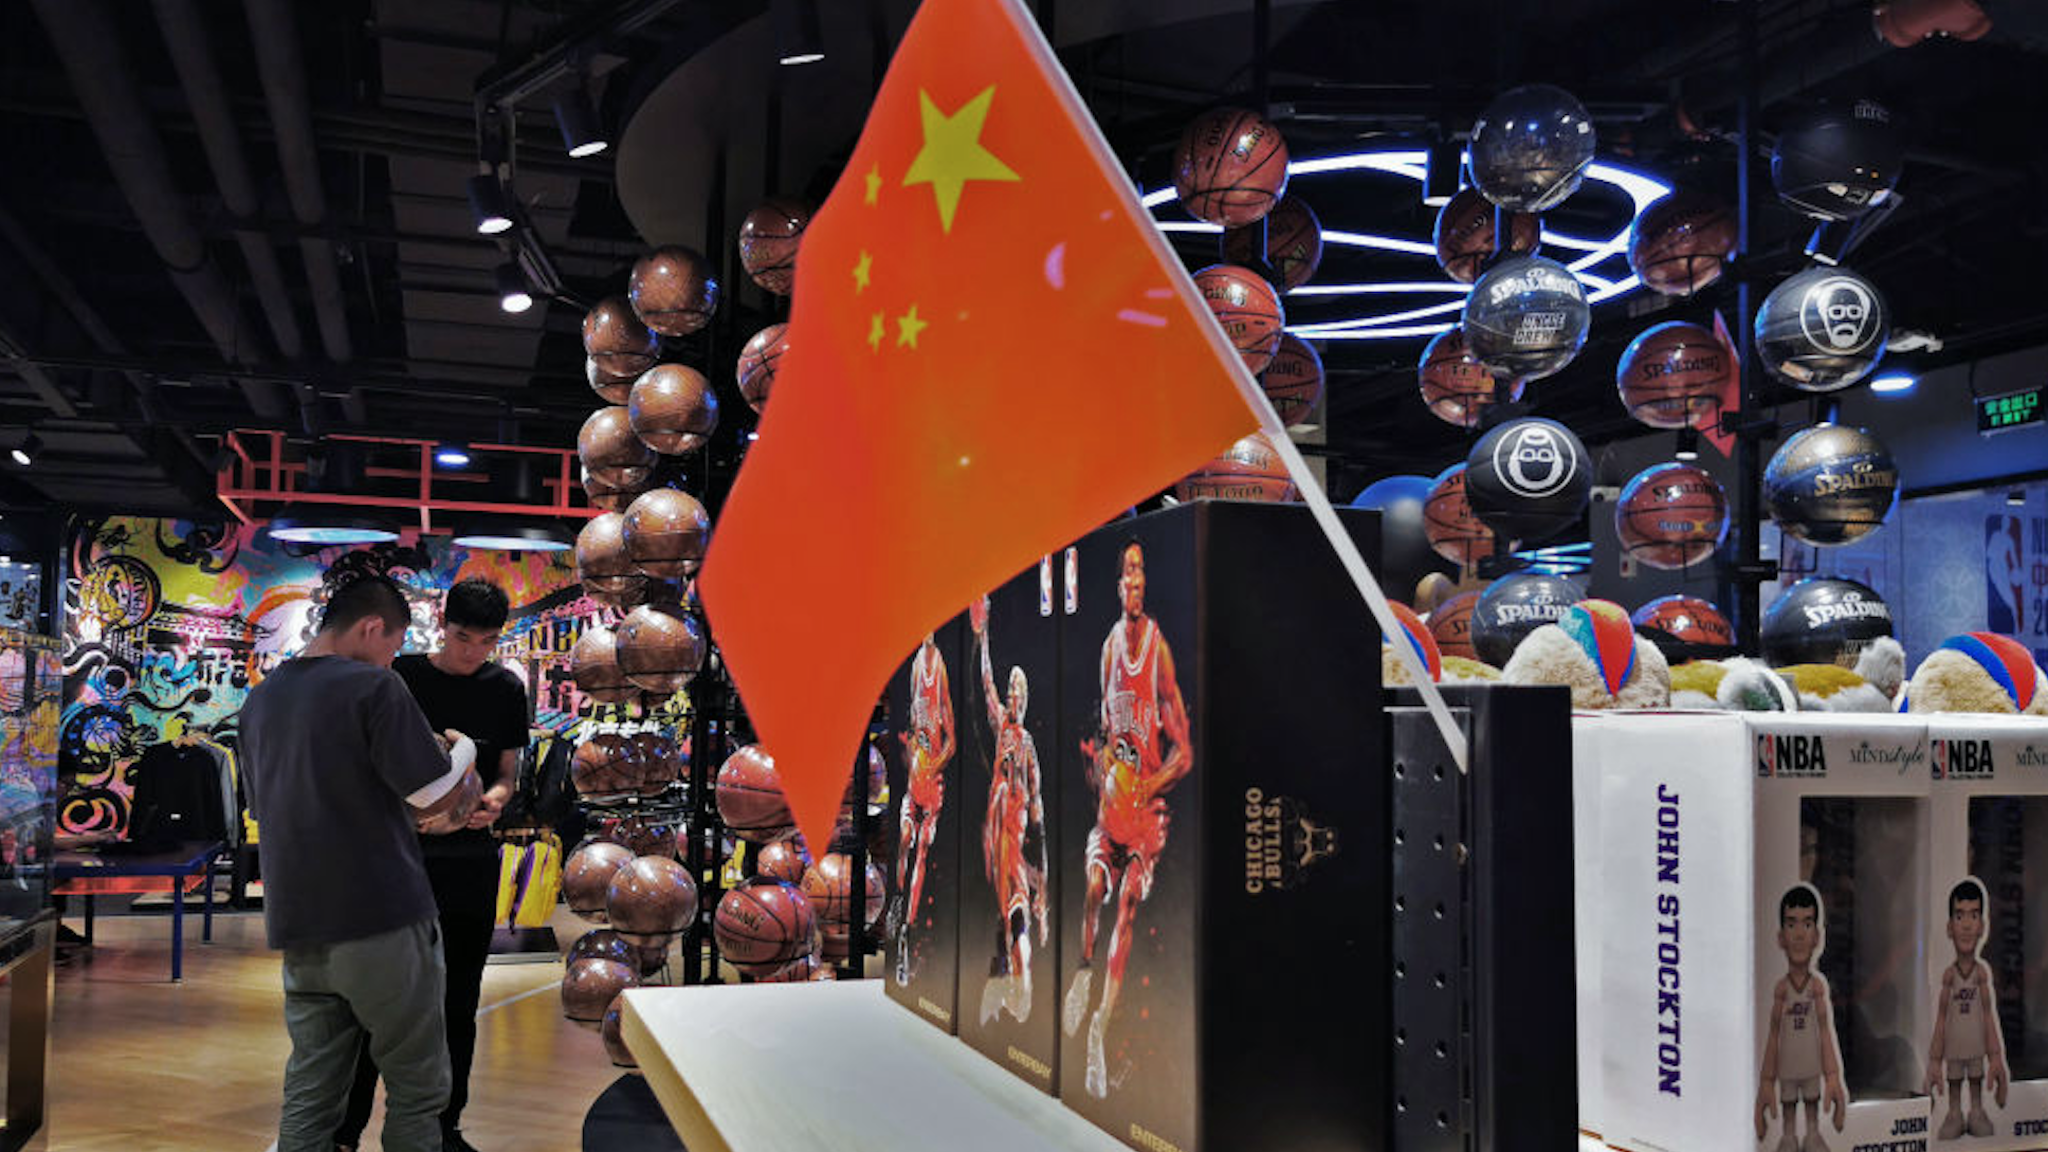 A Chinese flag is seen placed on merchandise in the NBA flagship retail store on October 9, 2019 in Beijing, China.